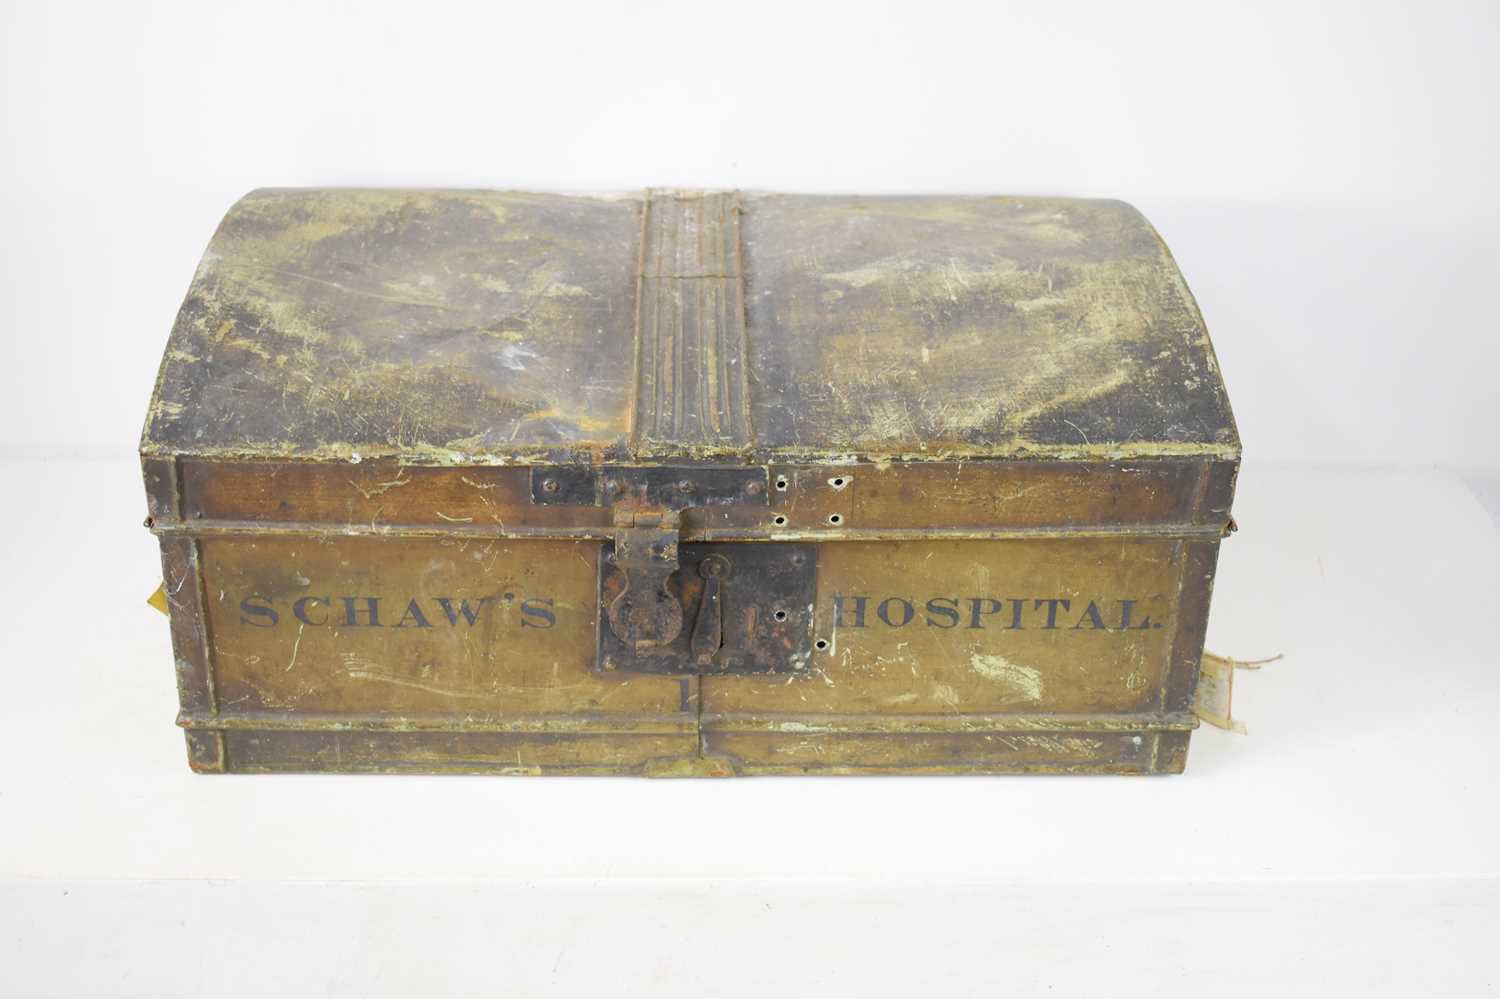 An antique Schaw's Hospital metal trunk with iron handles and lock, 60cm wide by 28cm high. [